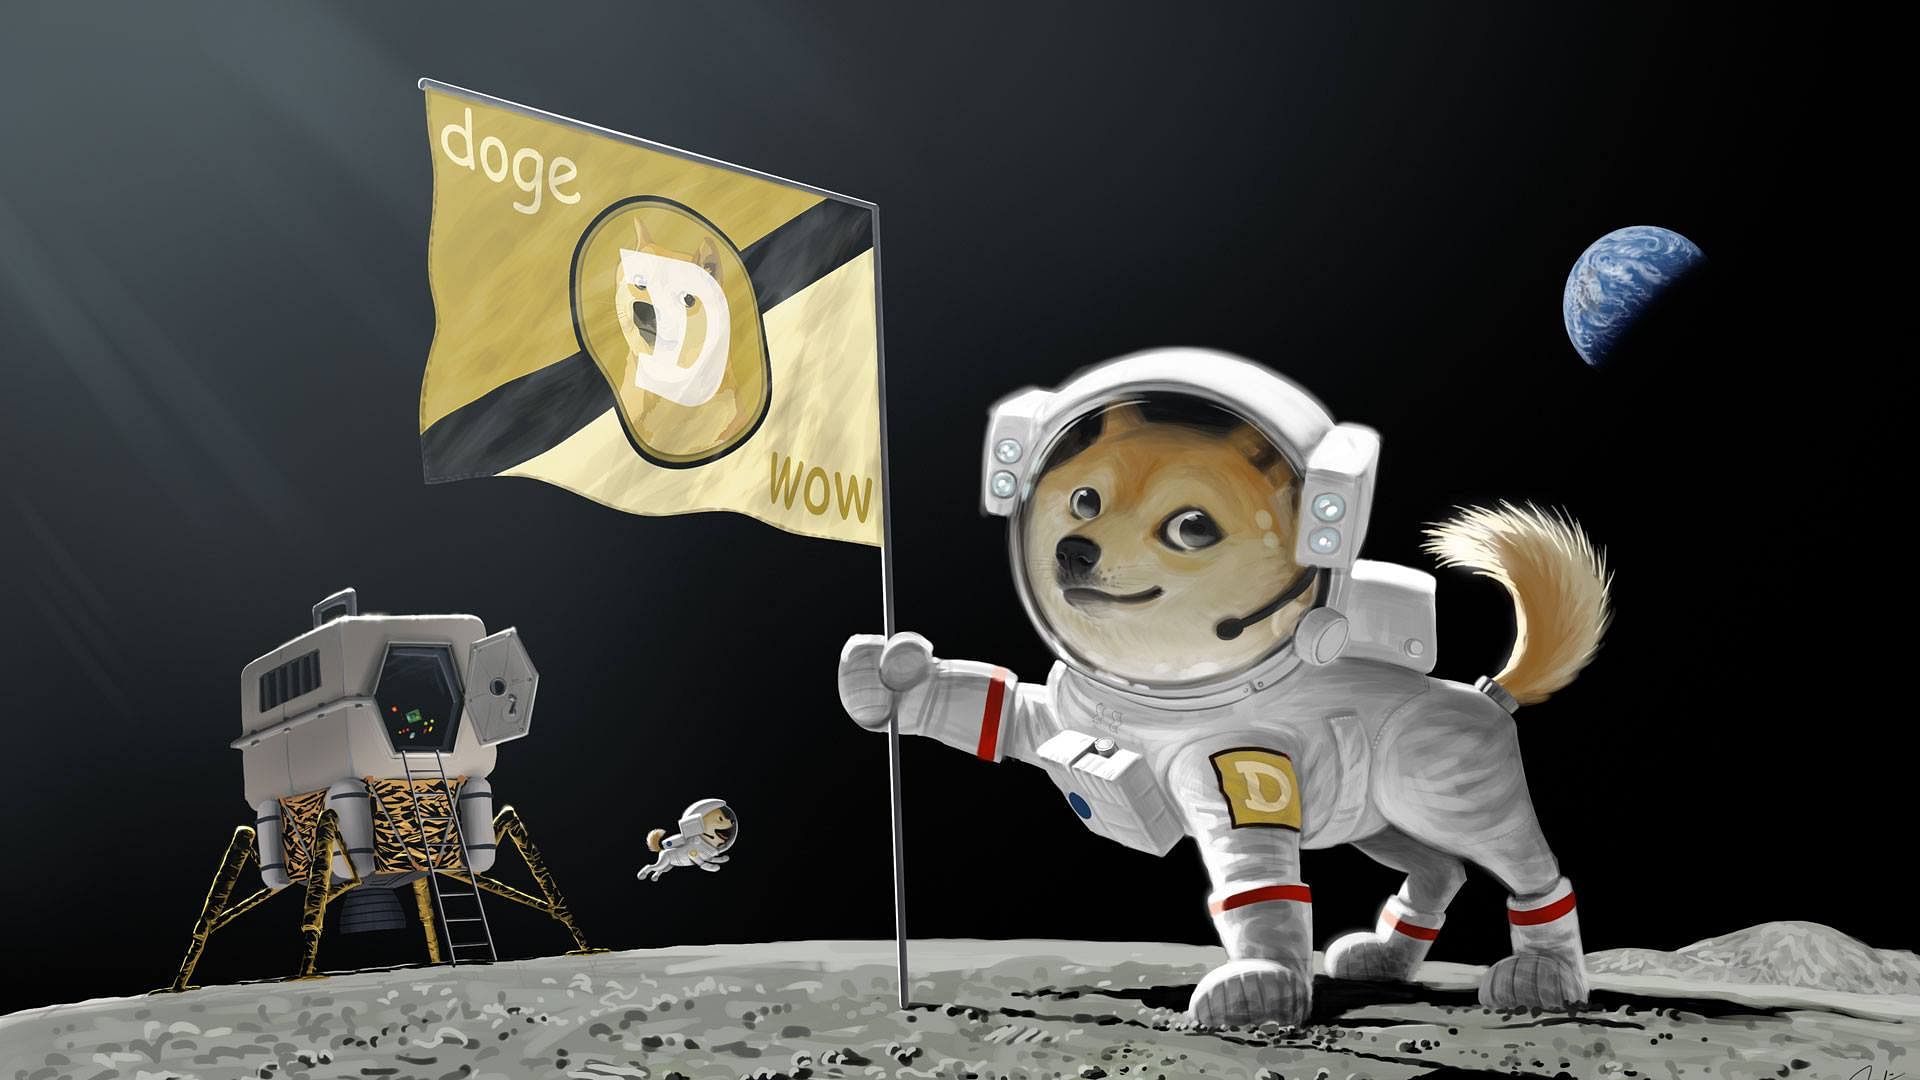 Dogecoin prices soared on Friday after Elon Musk, Mark Cuban and beef jerky brand Slim Jim backed the cryptocurrency.